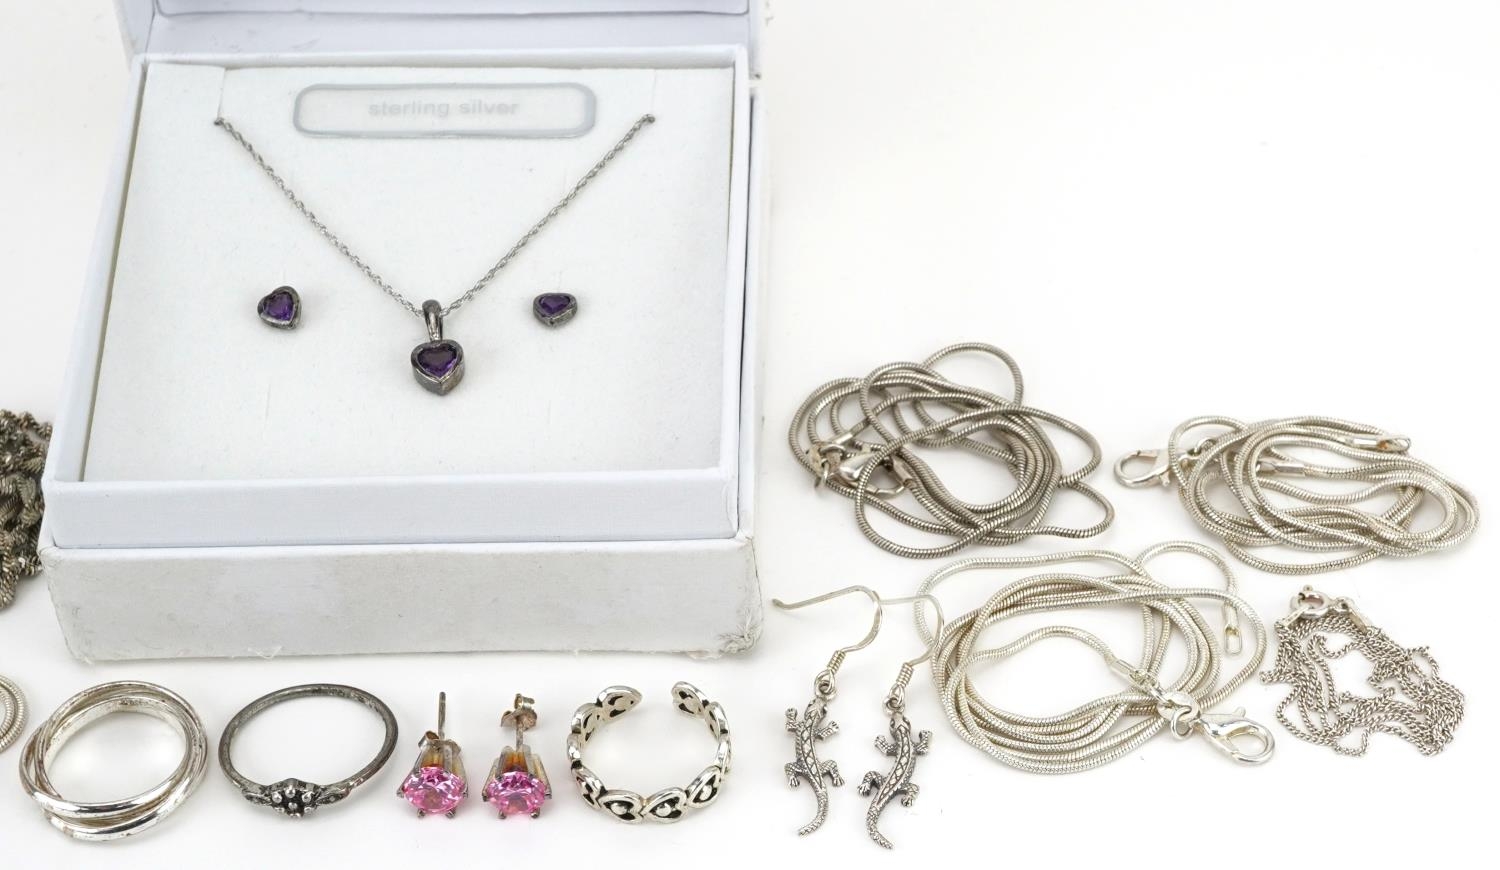 Silver and white metal jewellery including necklaces, pink stone earrings and an amethyst love heart - Image 3 of 4